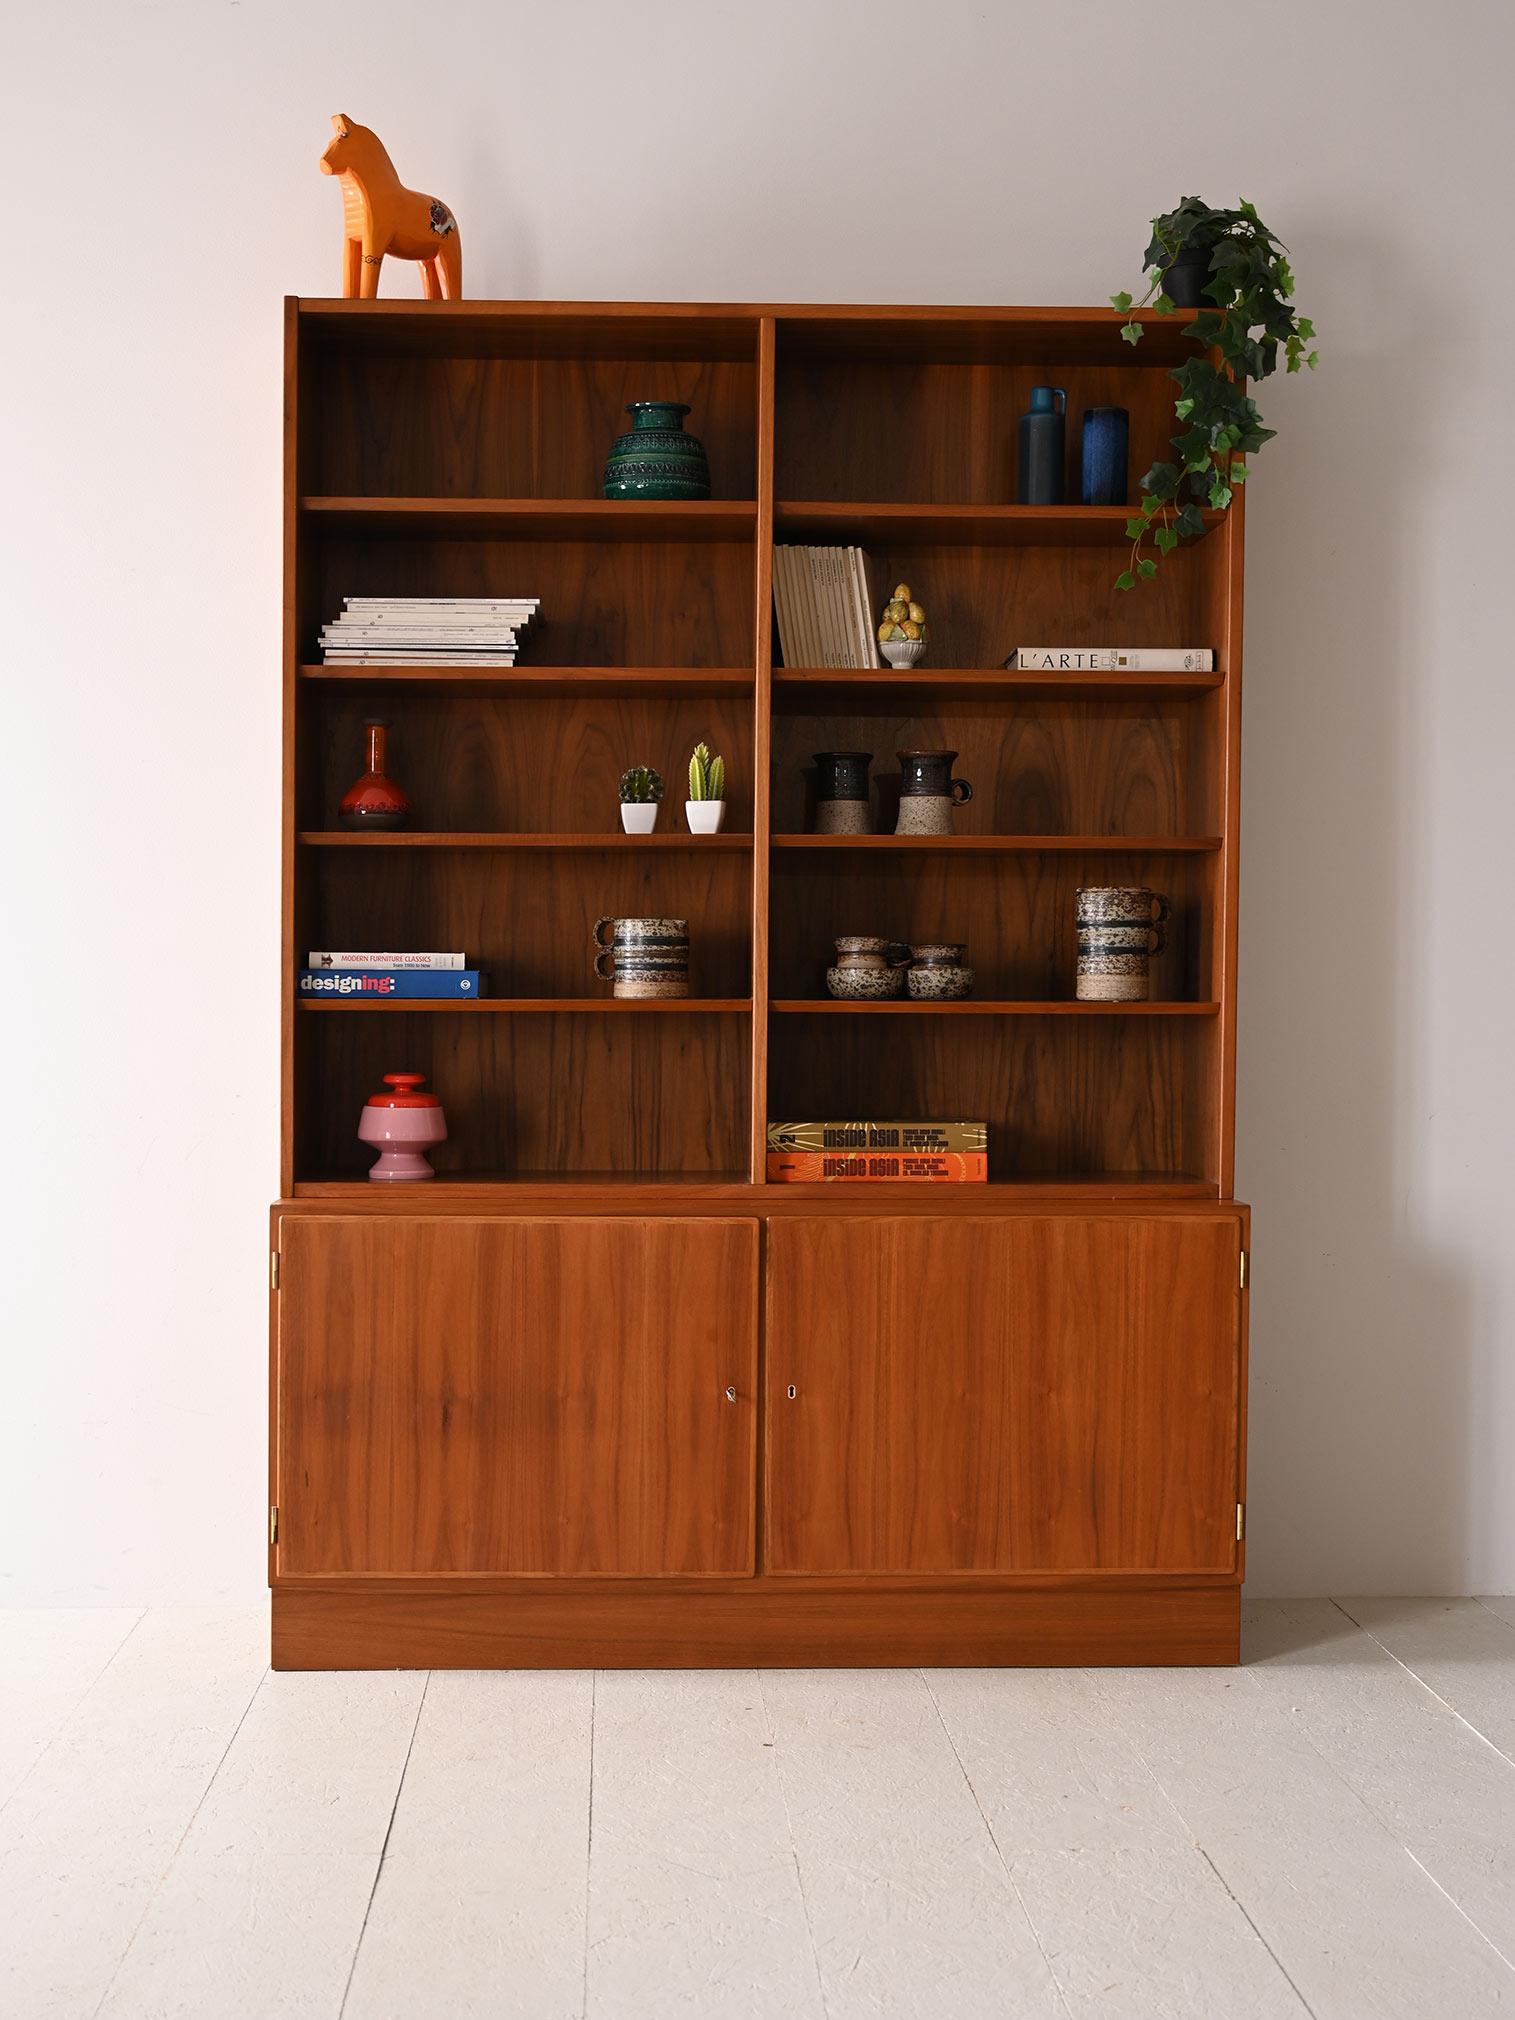 With a generous combination of open shelves and wide doors, it offers the perfect blend of display and storage. The high quality of the material and care in the workmanship make it a piece of furniture that not only enriches the aesthetics of a